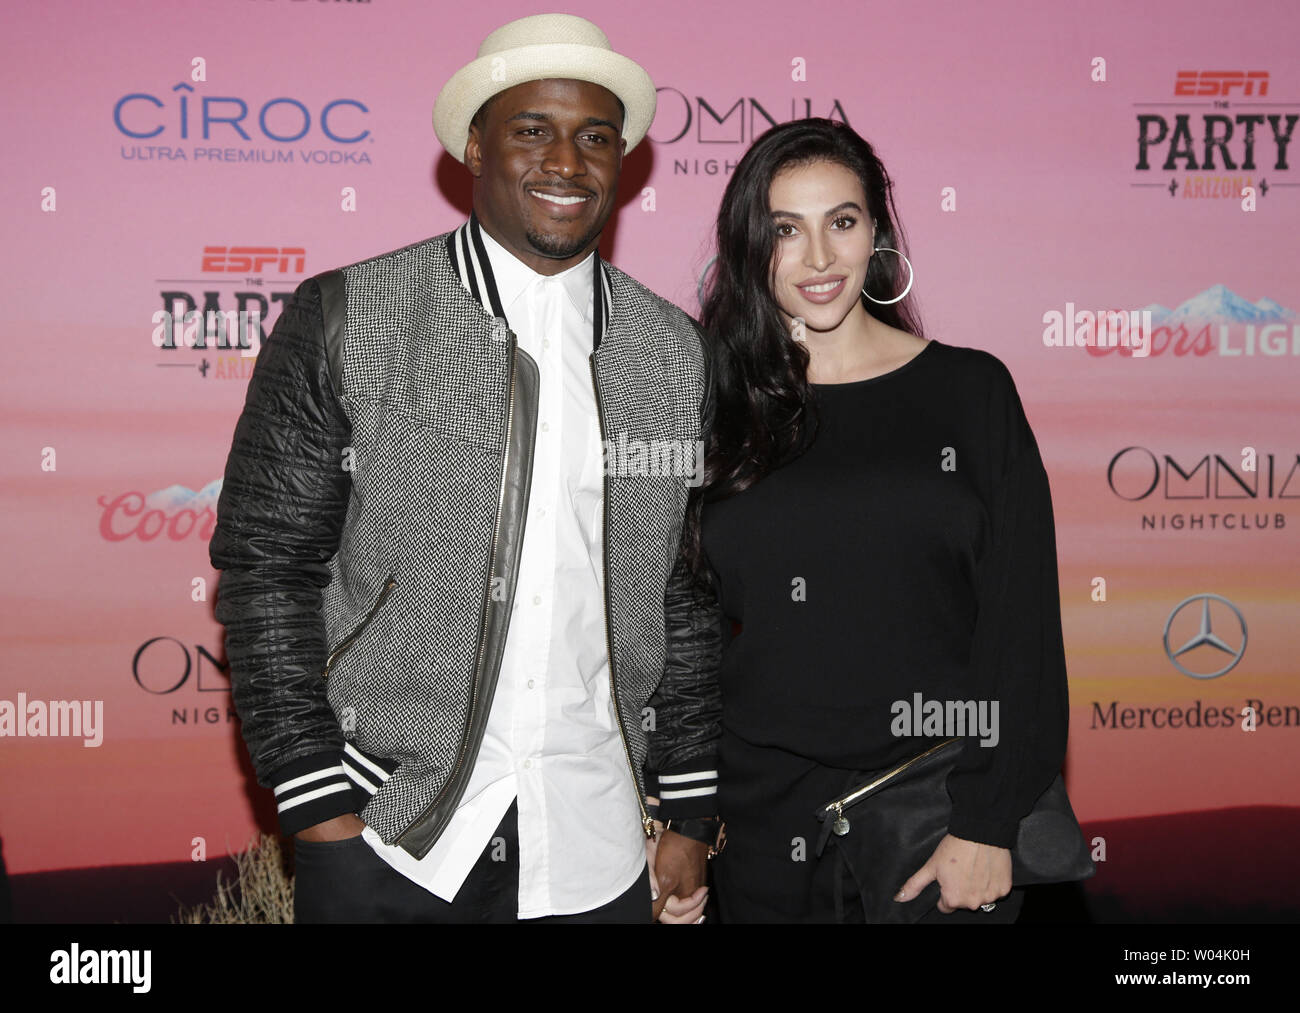 Reggie Bush and Lilit Avagyan arrive on the red carpet at ESPN The Party, one of the events leading up to Super Bowl XLIX, in Scottsdale, AZ on January 30, 2015. Super Bowl XLIV will feature the Seattle Seahawks and the New England Patriots on February 1st at University of Phoenix Stadium in Glendale, Arizona.        Photo by John Angelillo/UPI Stock Photo